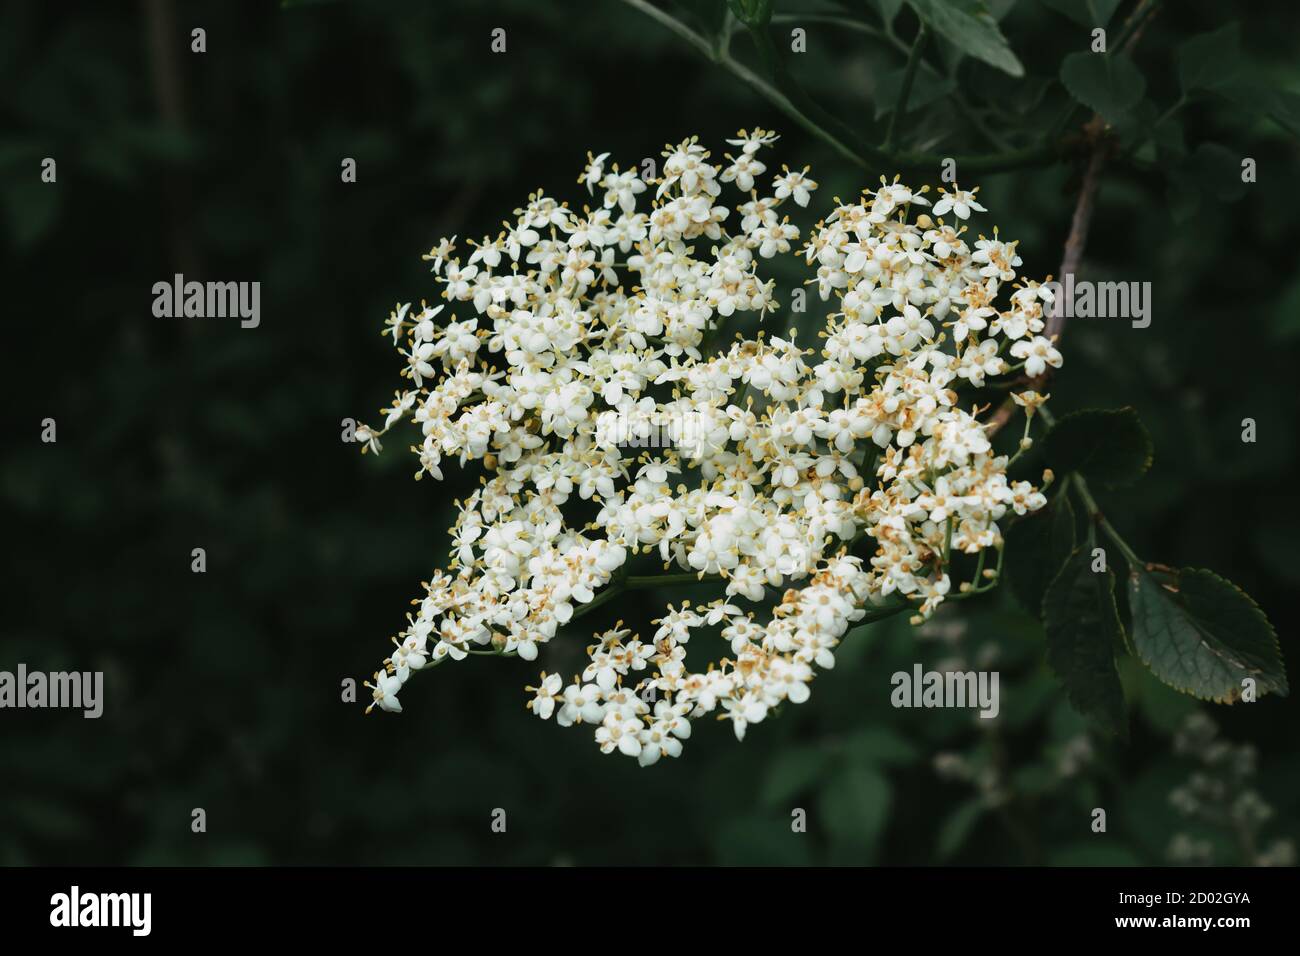 Flowers clustered in a branch. Stock Photo